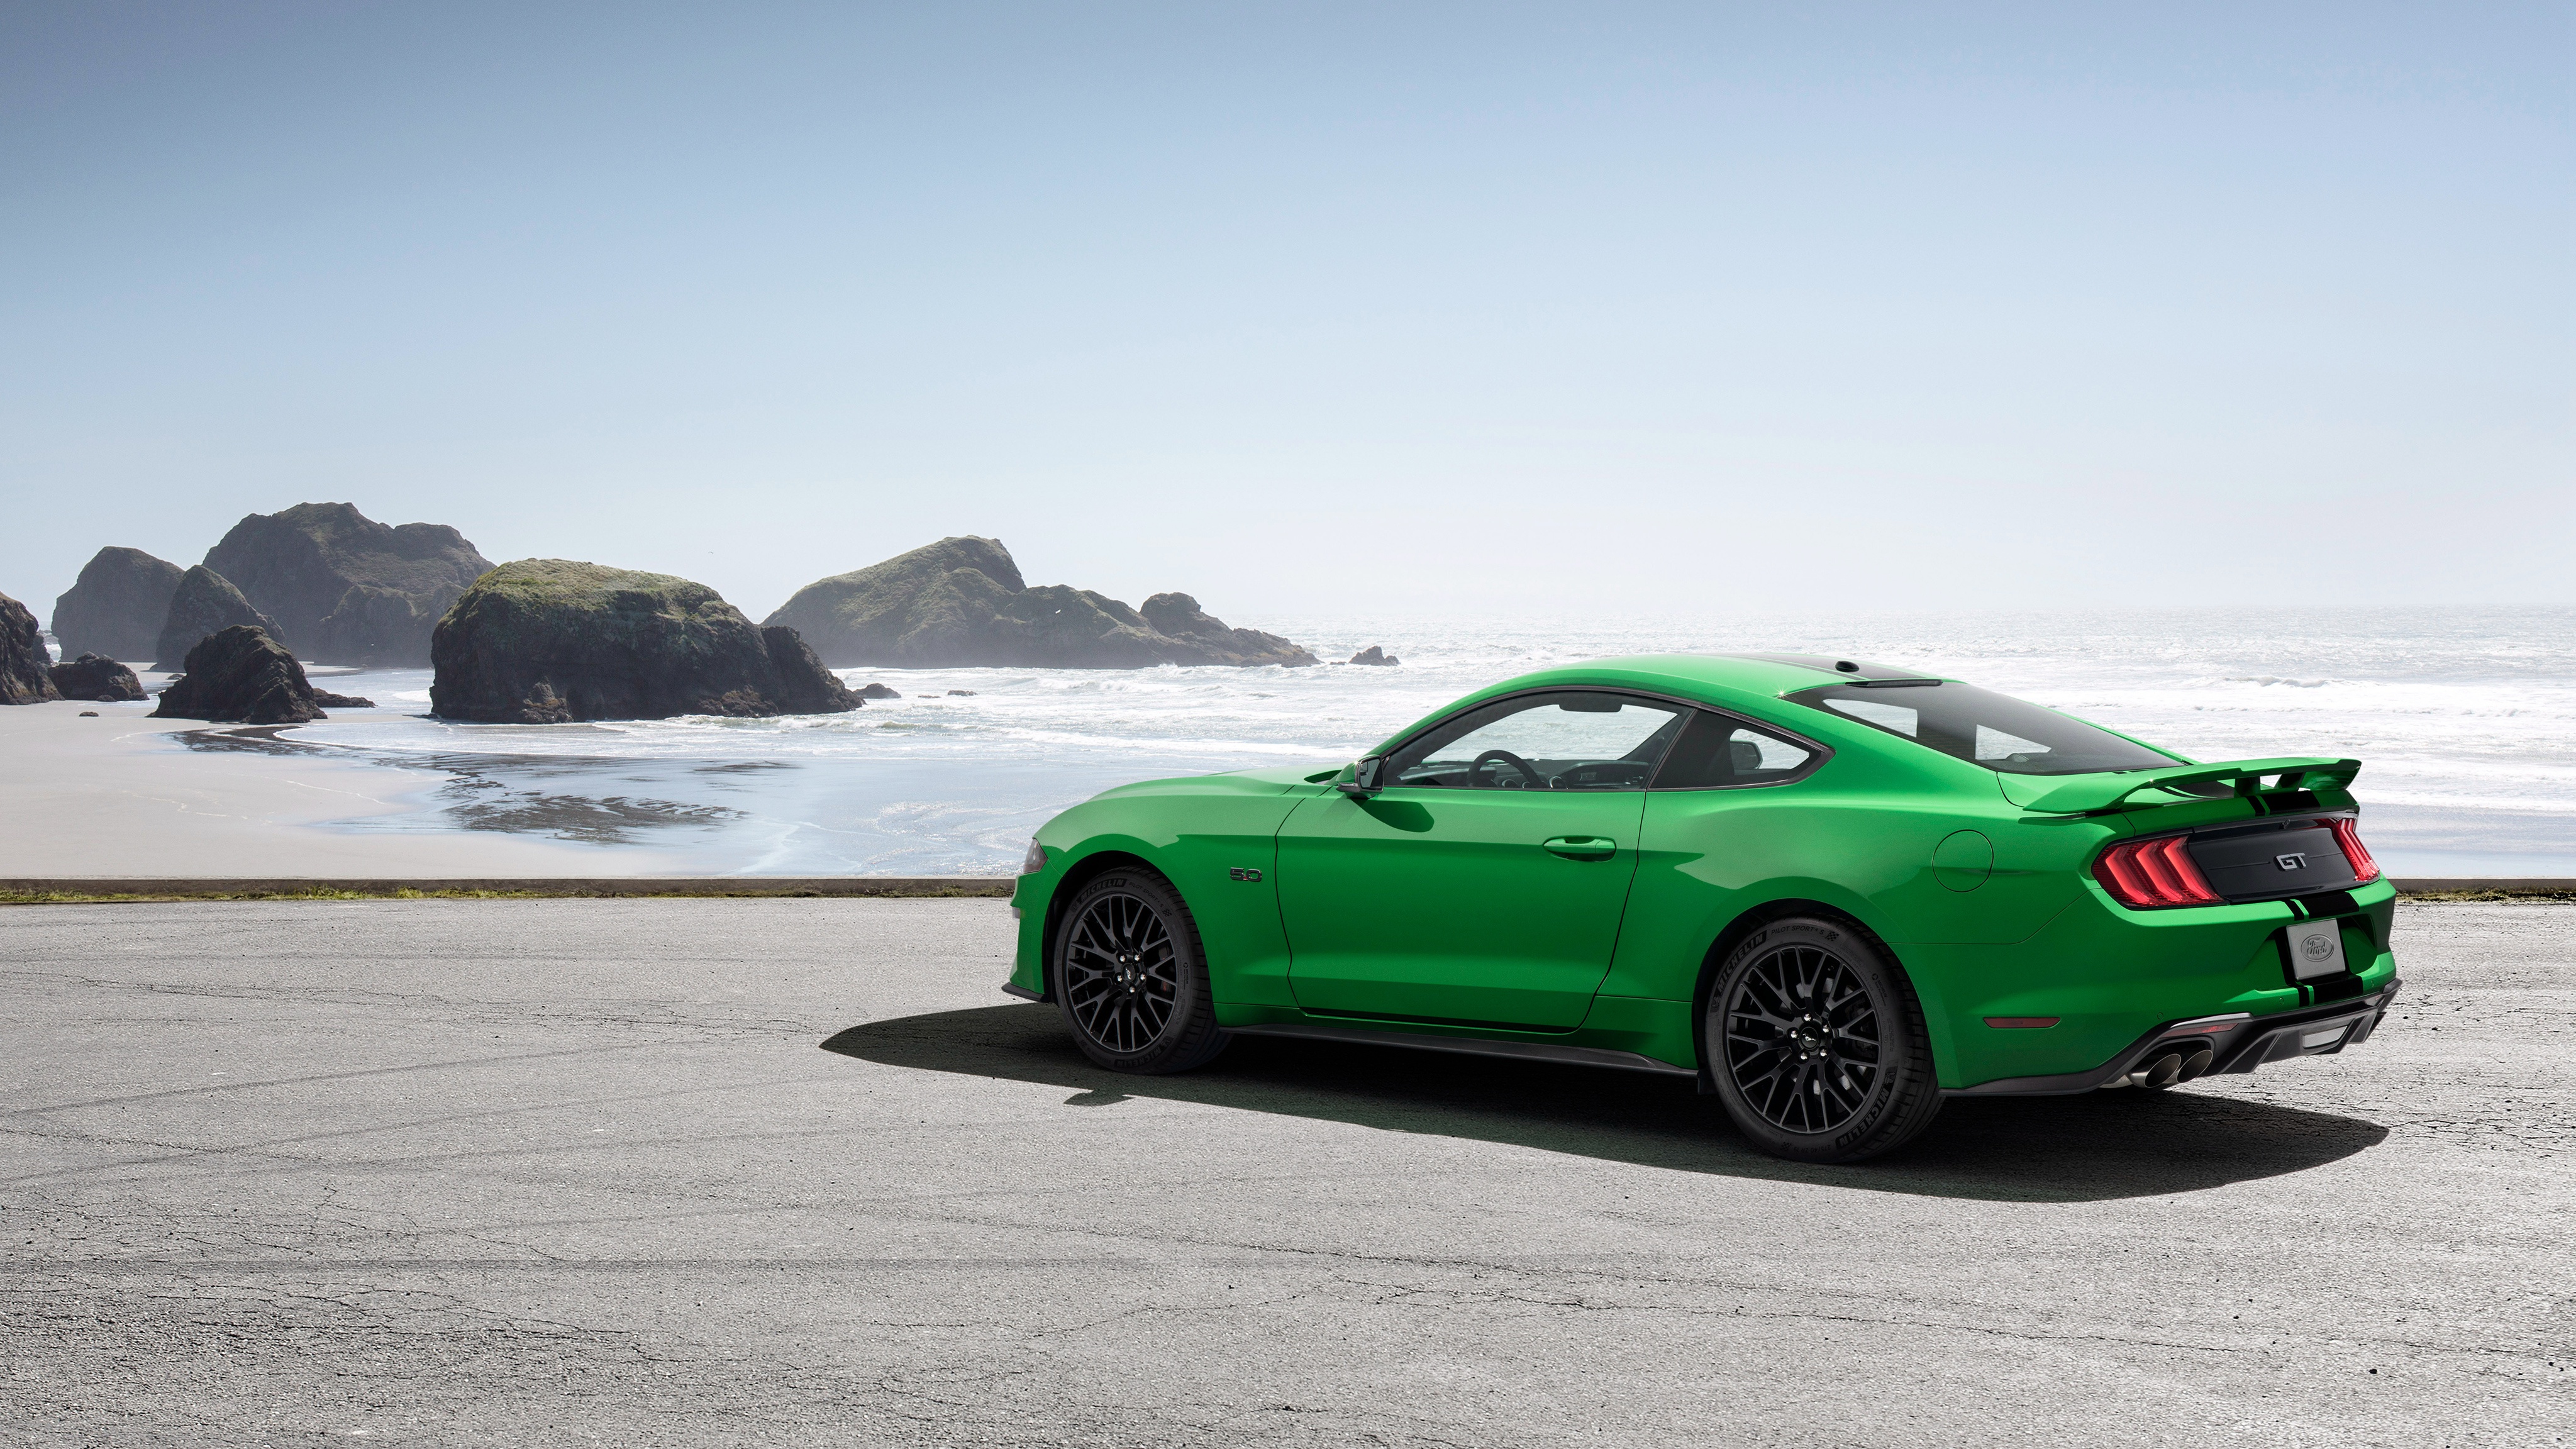 Car Ford Ford Mustang Gt Green Car Muscle Car Vehicle 4096x2304